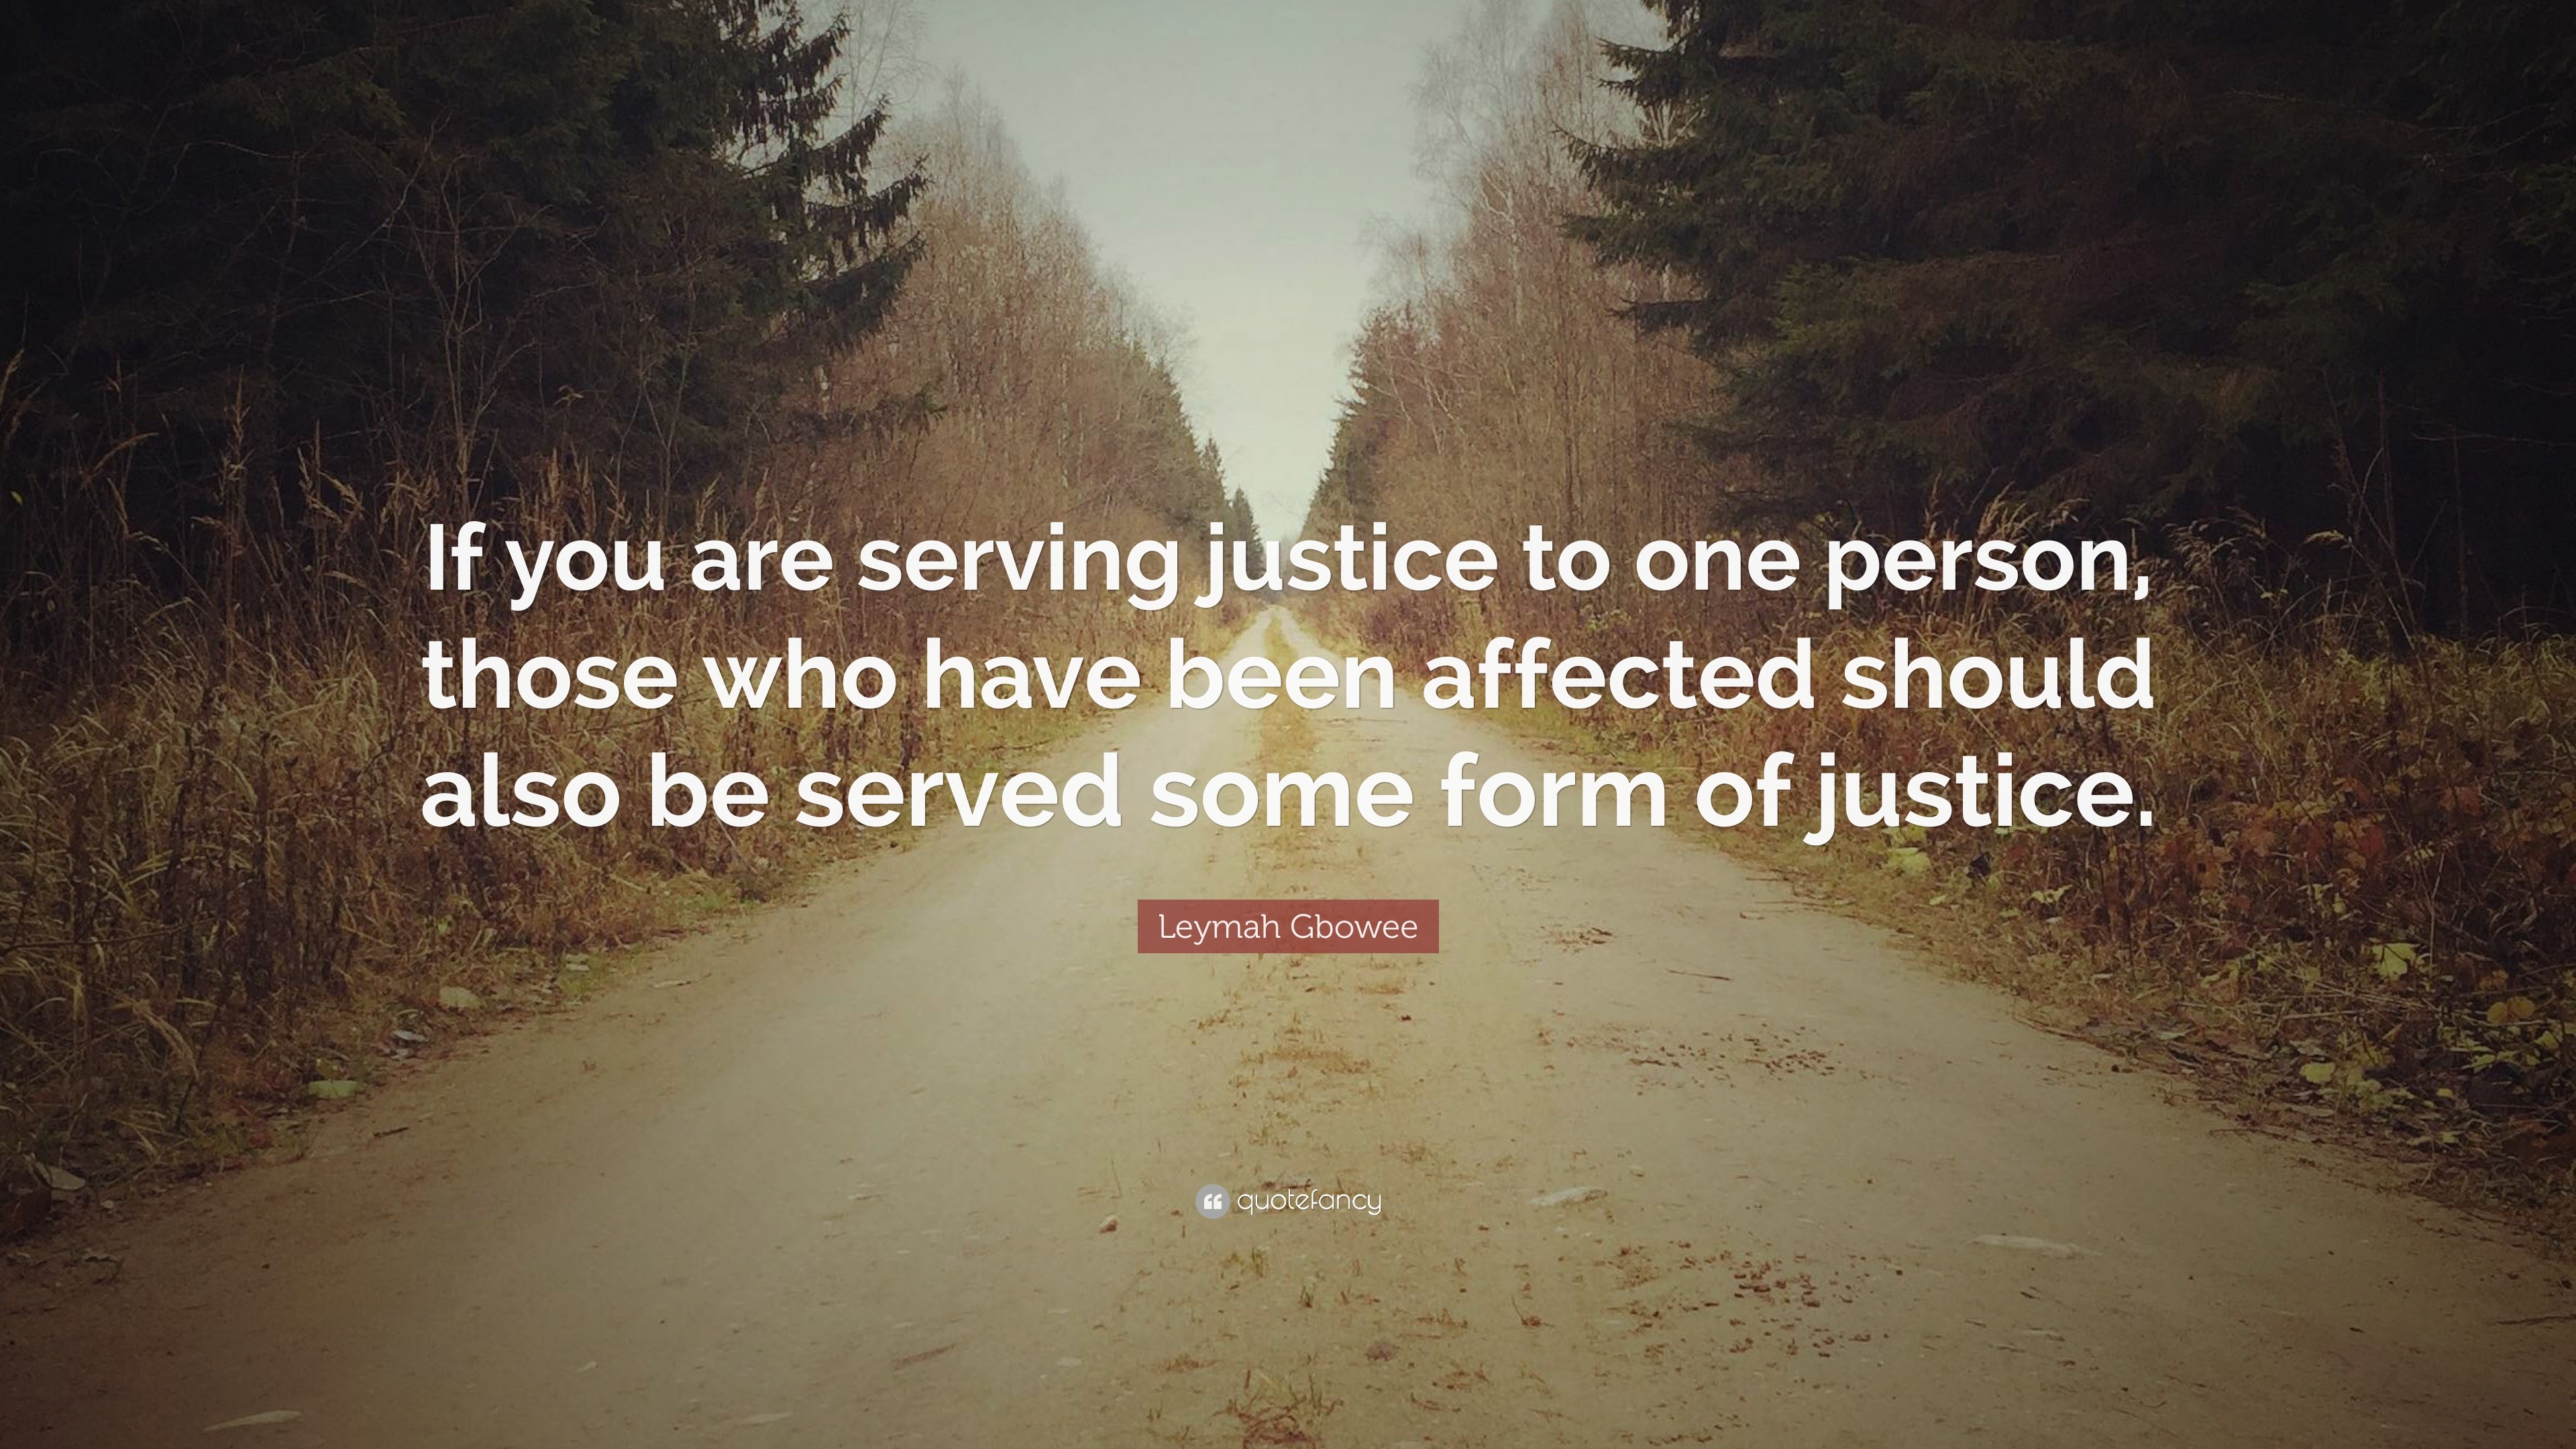 Leymah Gbowee Quote “If you are serving justice to one